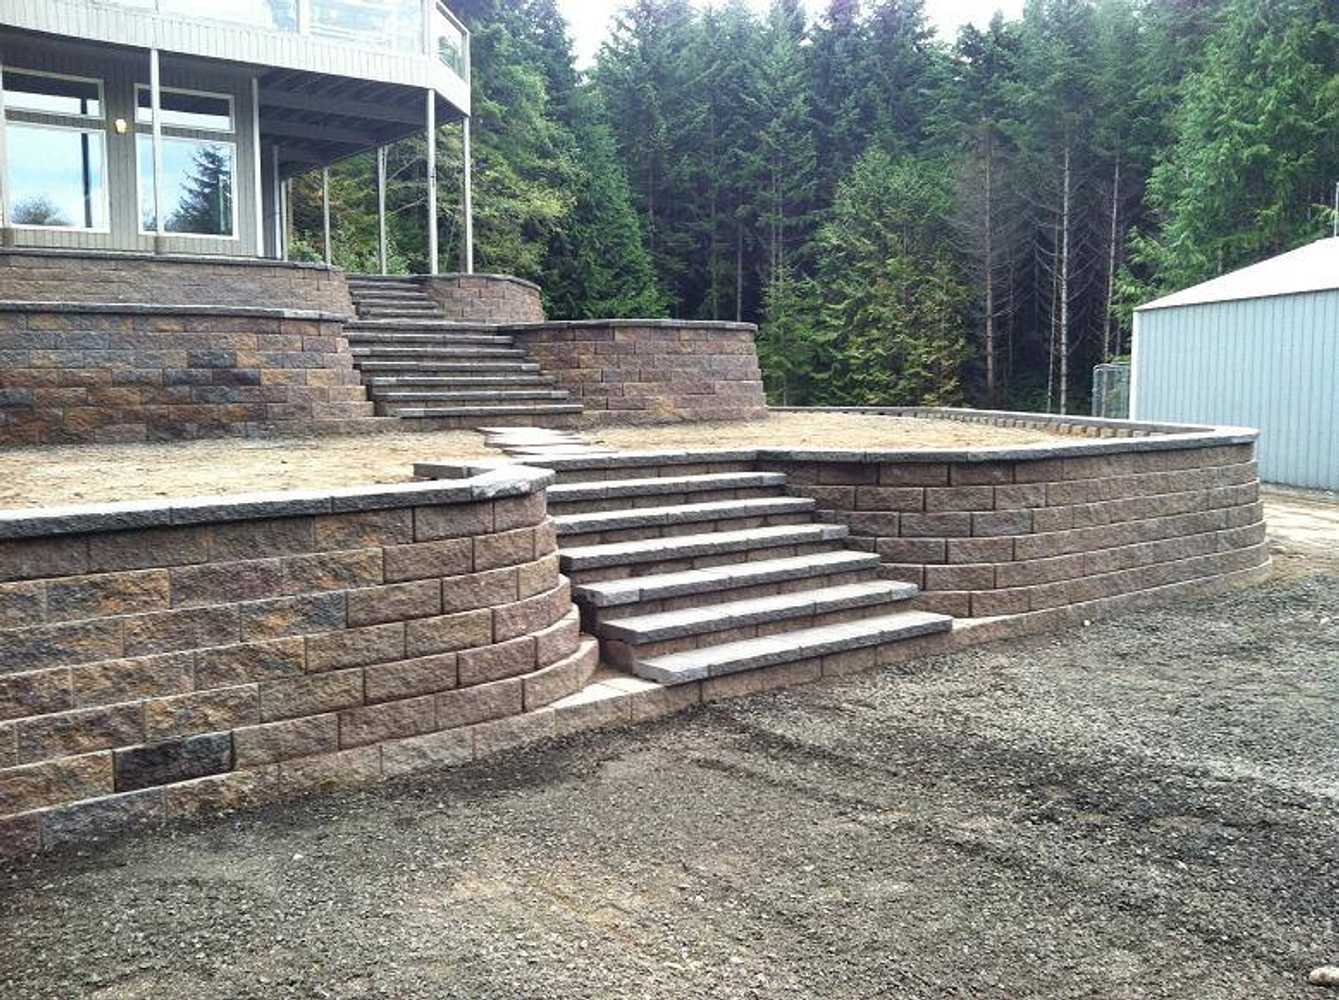 Photos from Dansons Landscaping Inc